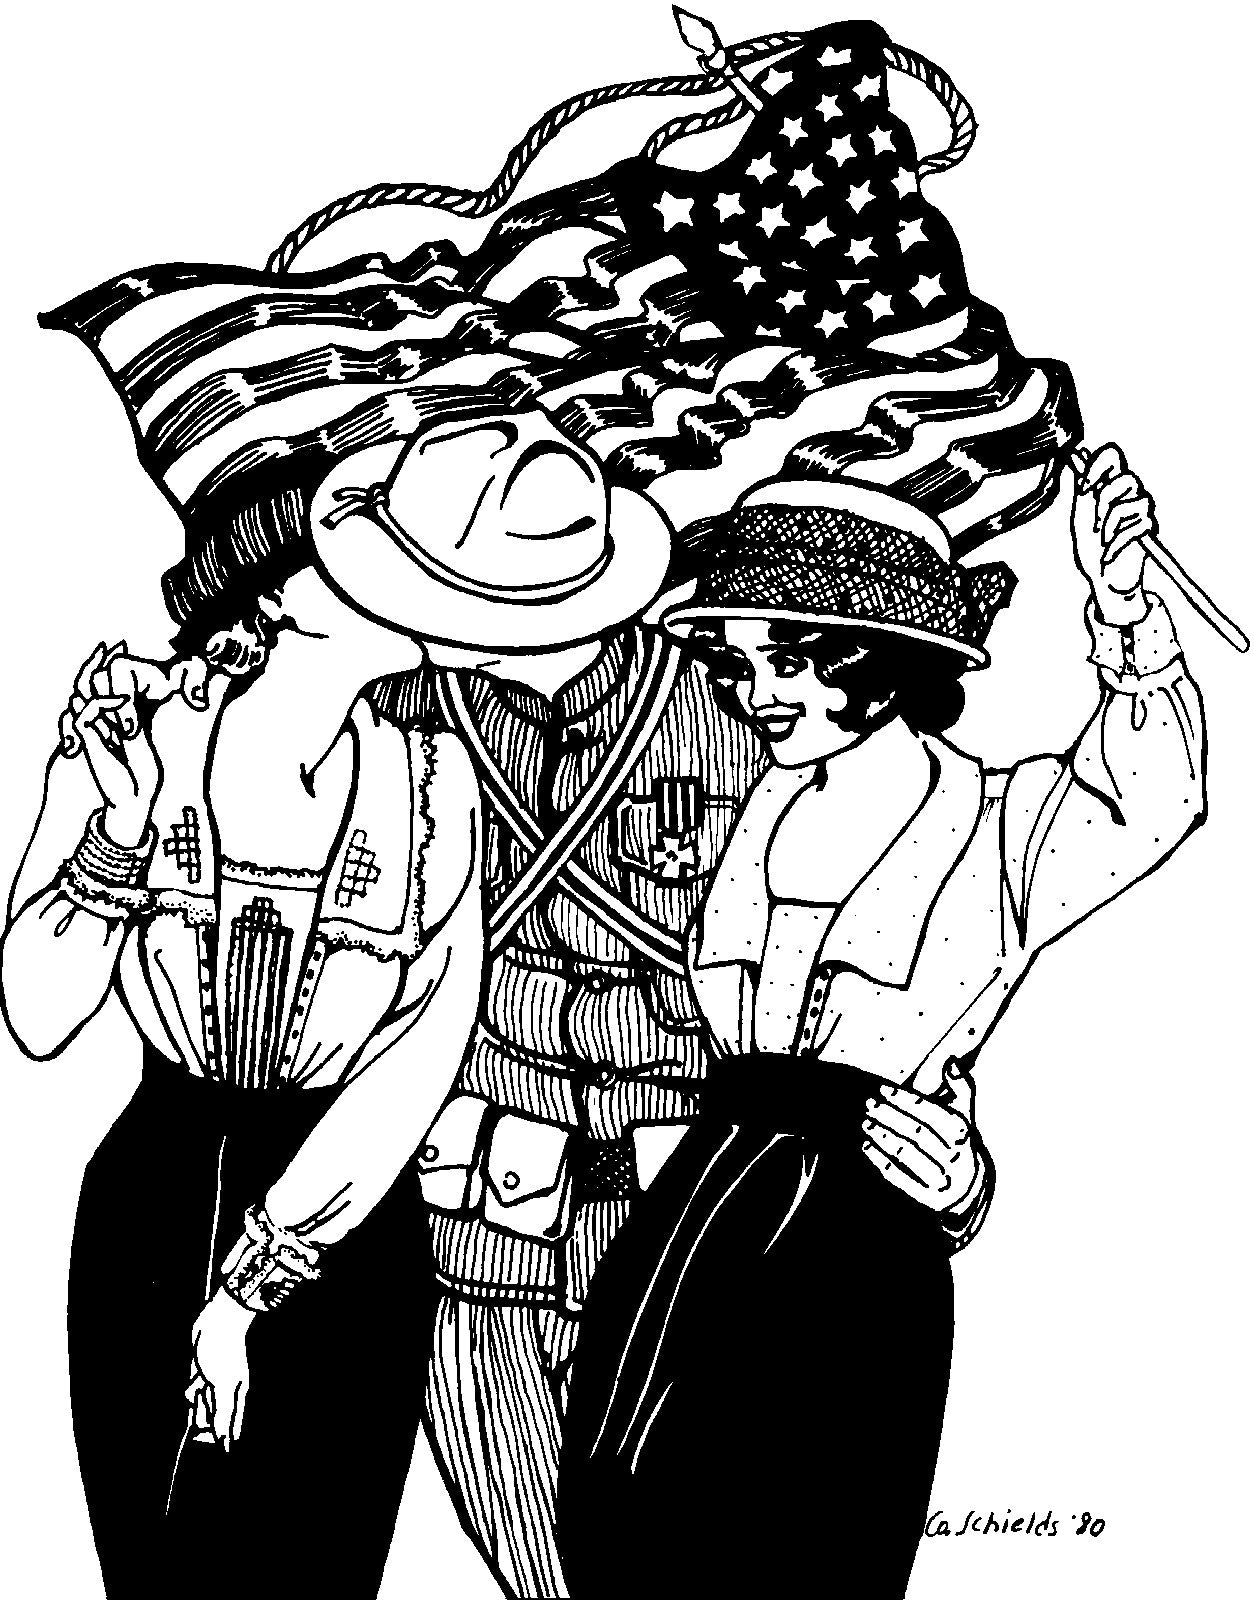 Black and white pen and ink drawing of a man kissing a woman and another woman standing with an American Flag in her hand waving in the background. Both women are wearing 210 Armistice Blouse.